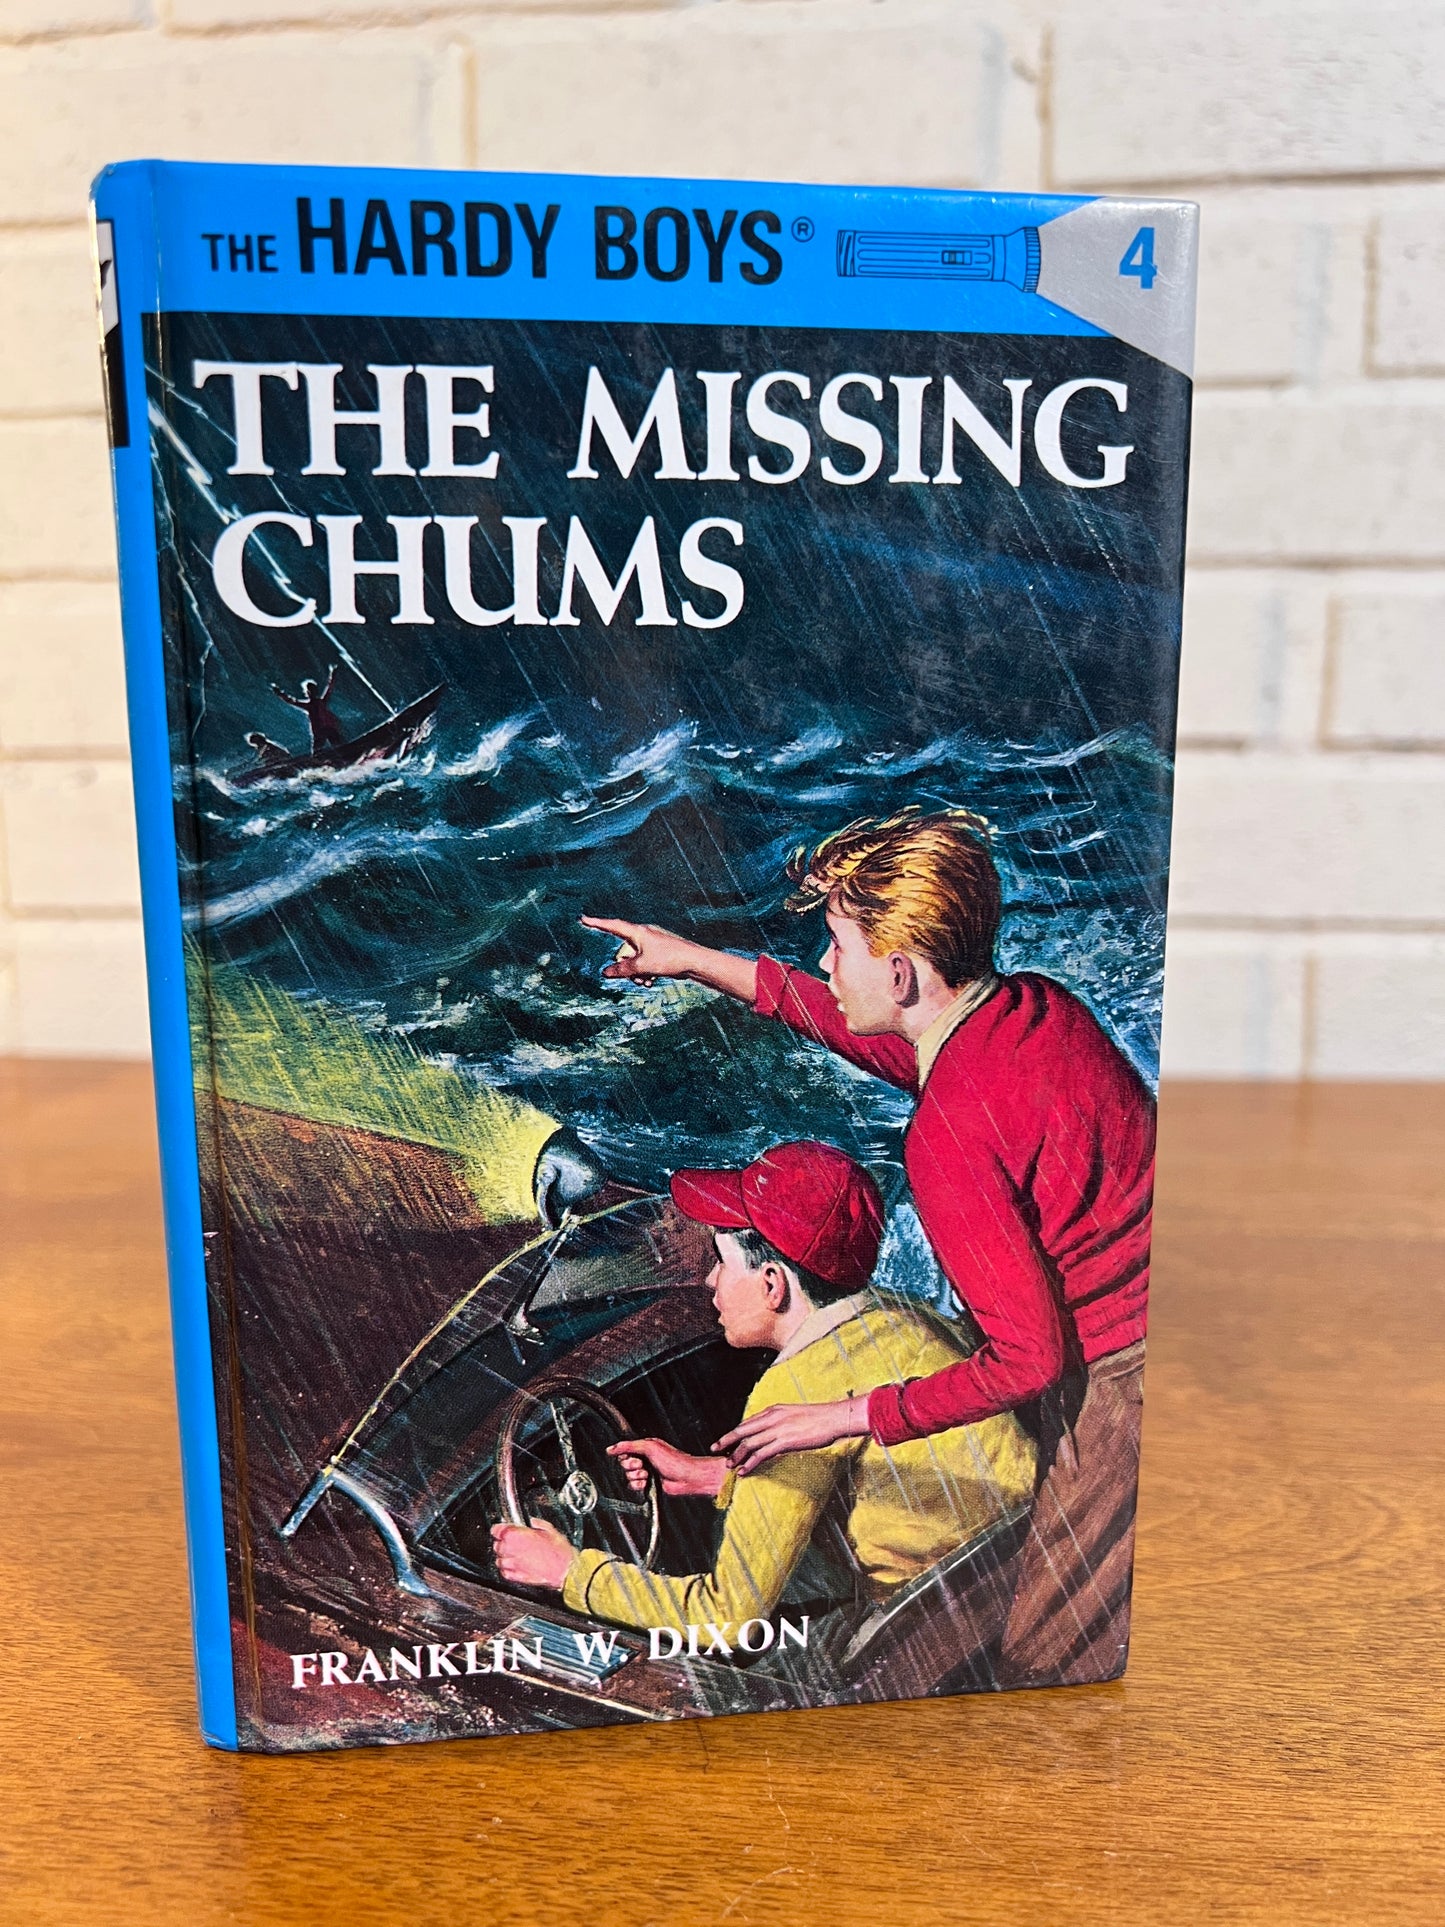 The Missing Chums #4 by Franklin W. Dixon - The Hardy Boys